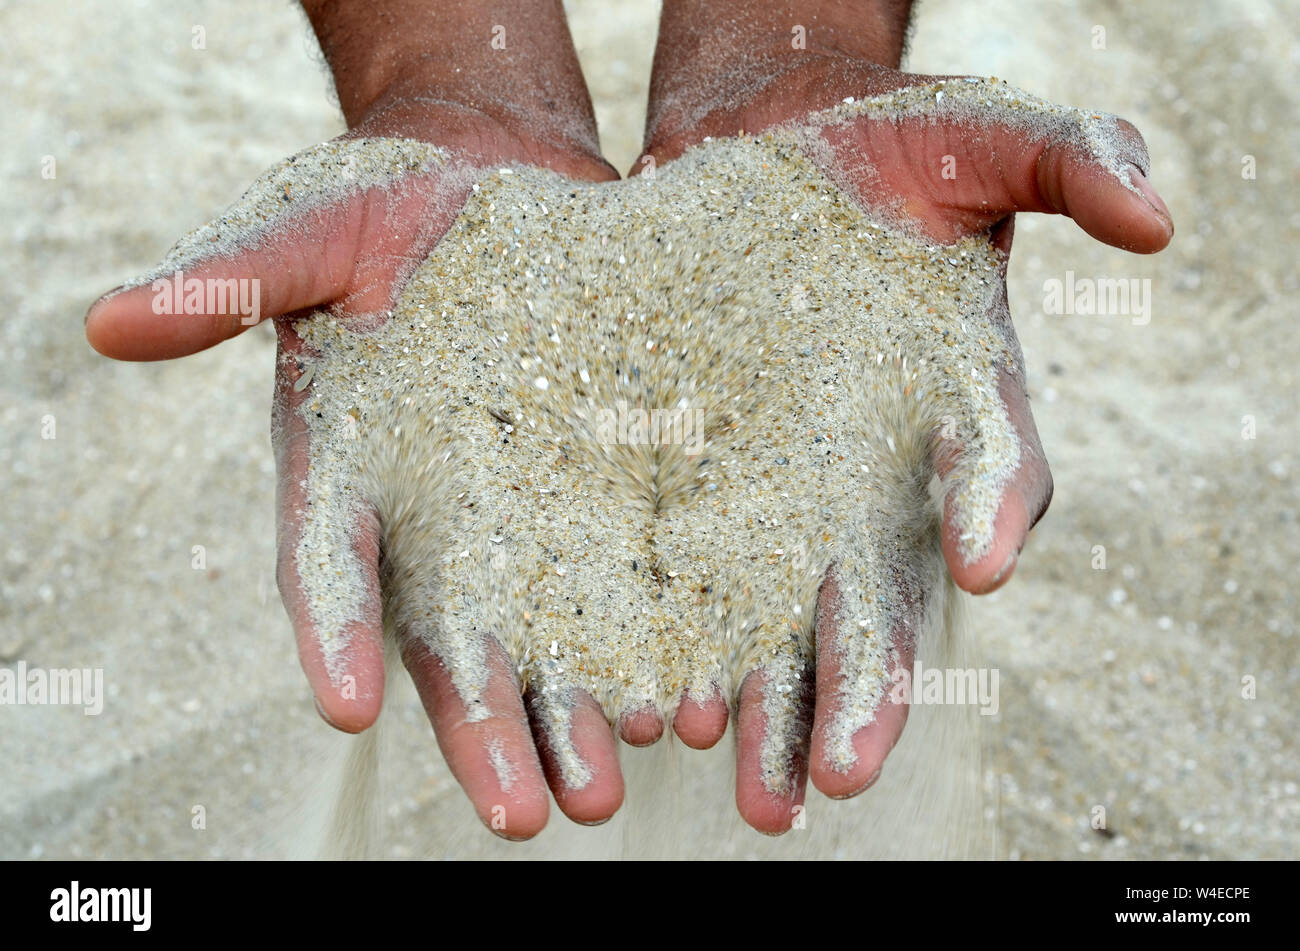 DNA Human A man and woman squatting on Tybee beach have sand pouring through their hands. Stock Photo